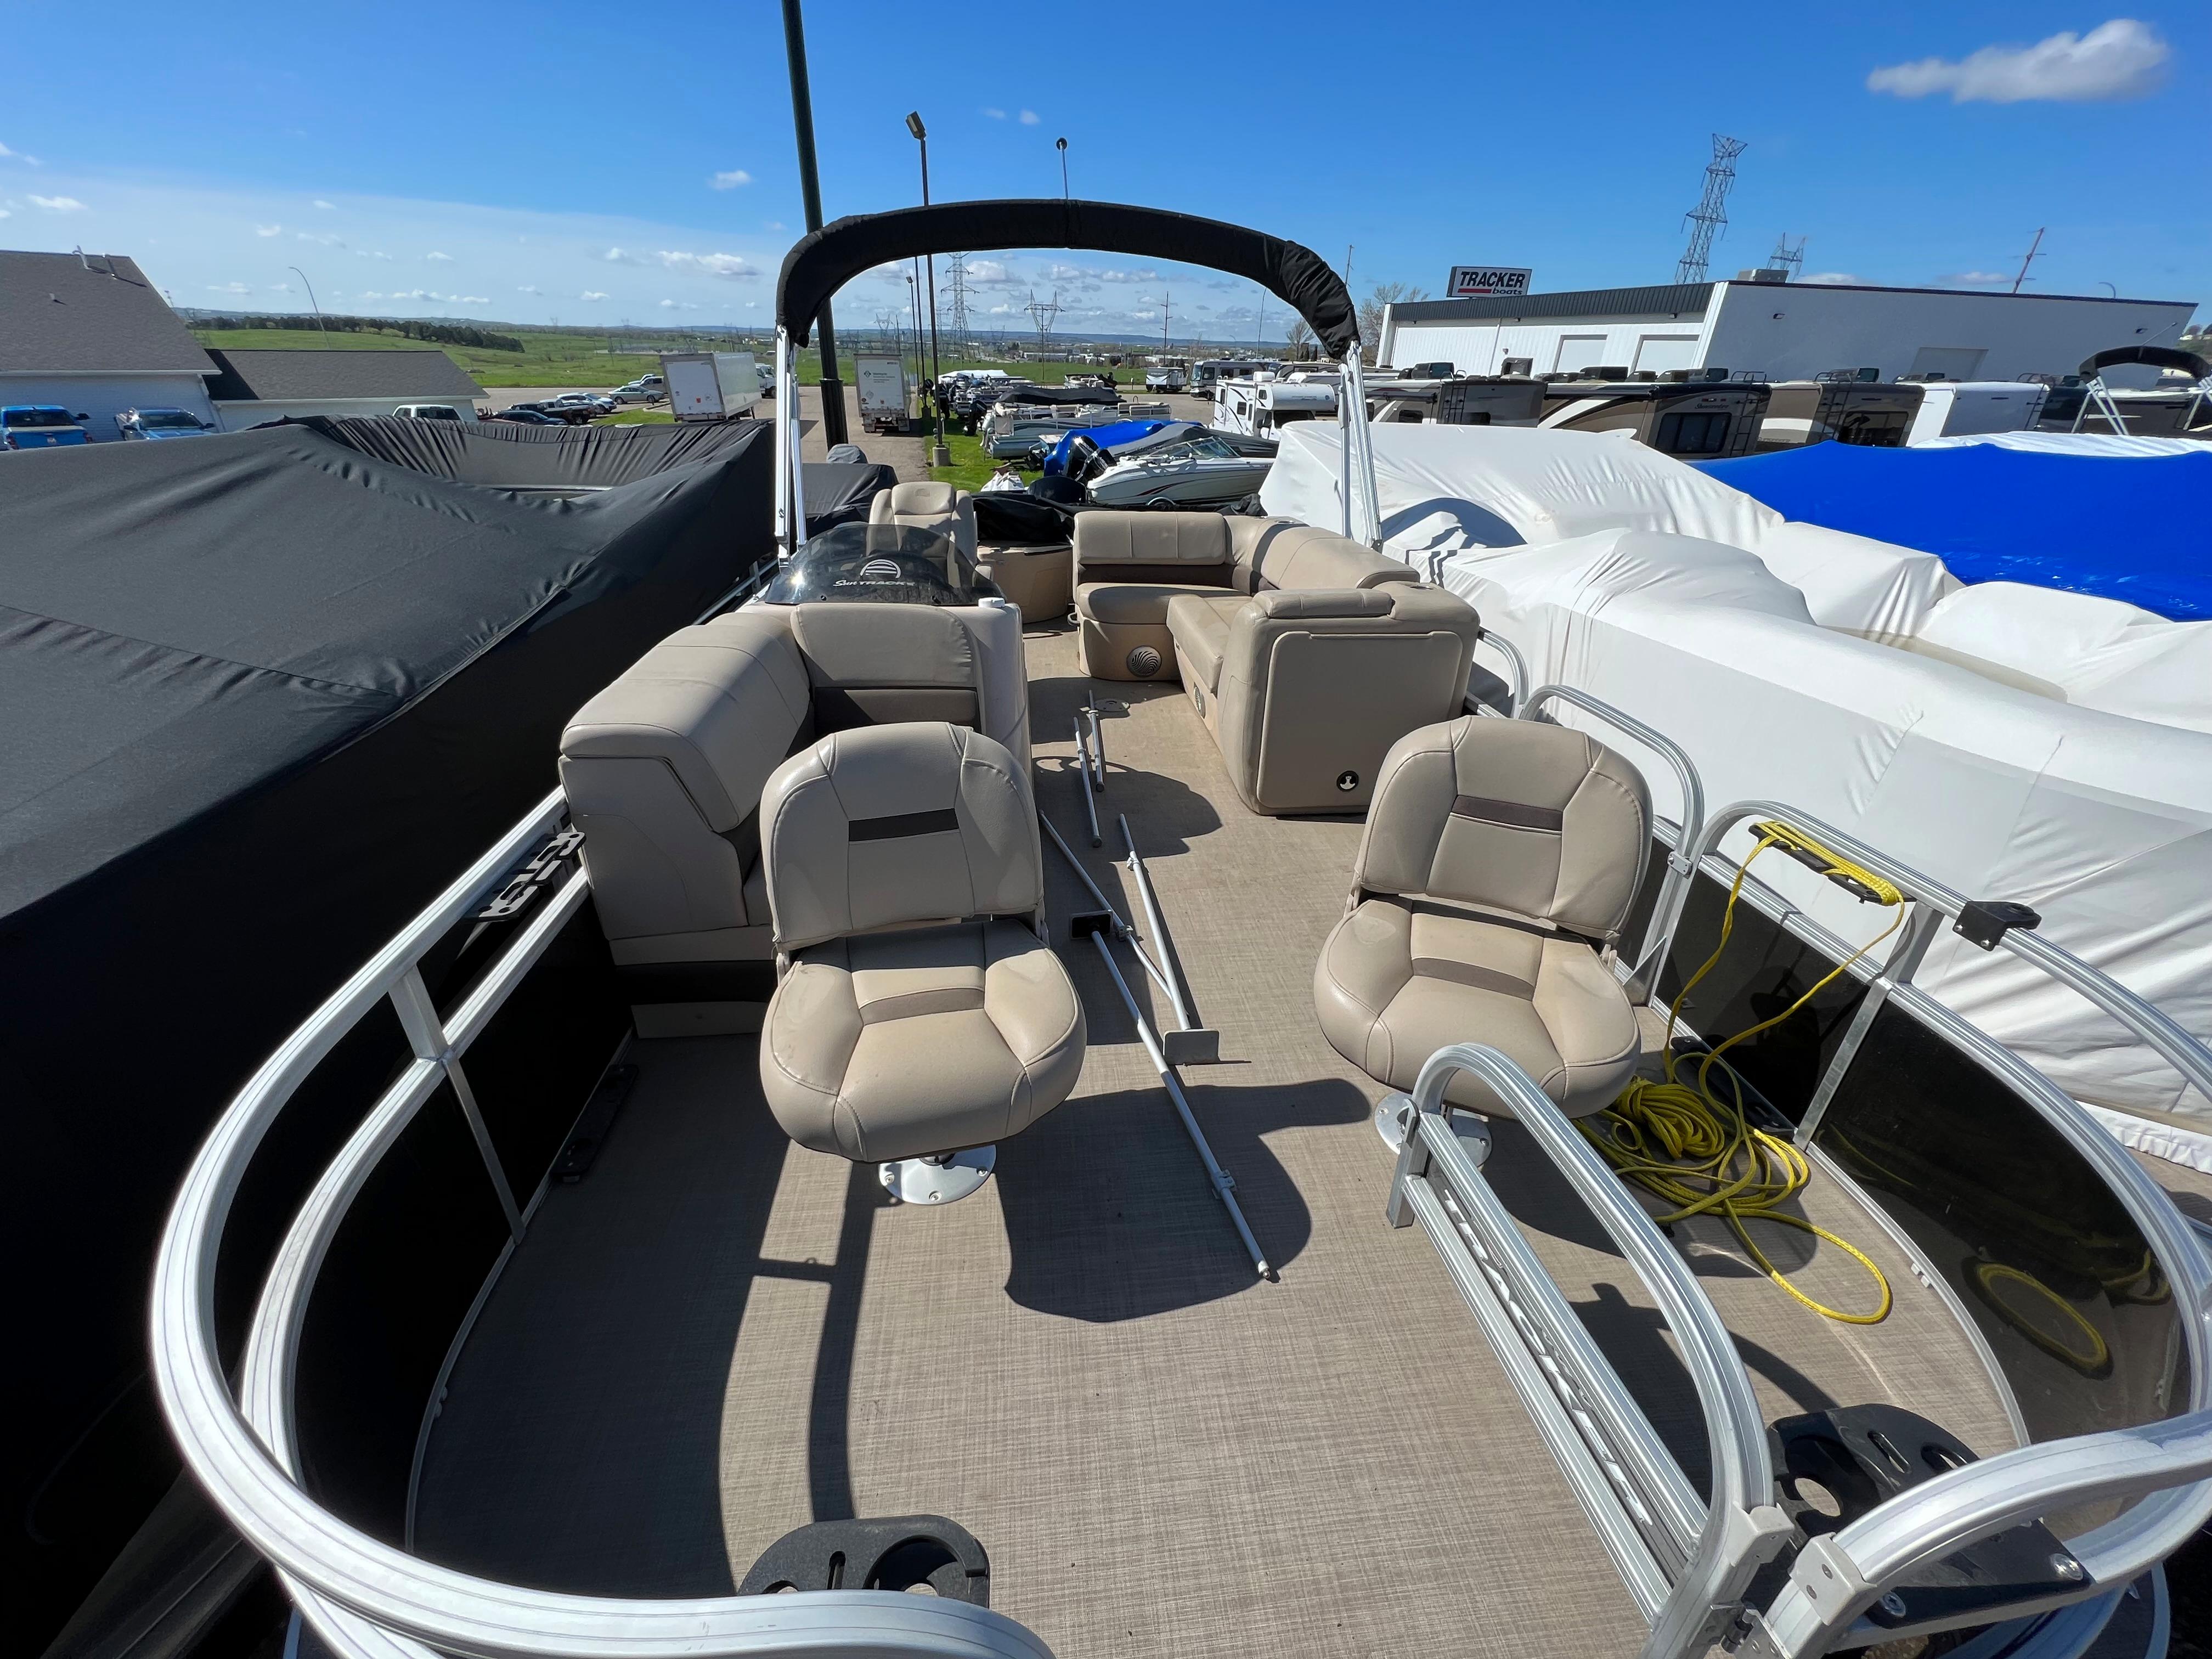 Explore Sun Tracker 21 Party Barge Boats For Sale - Boat Trader